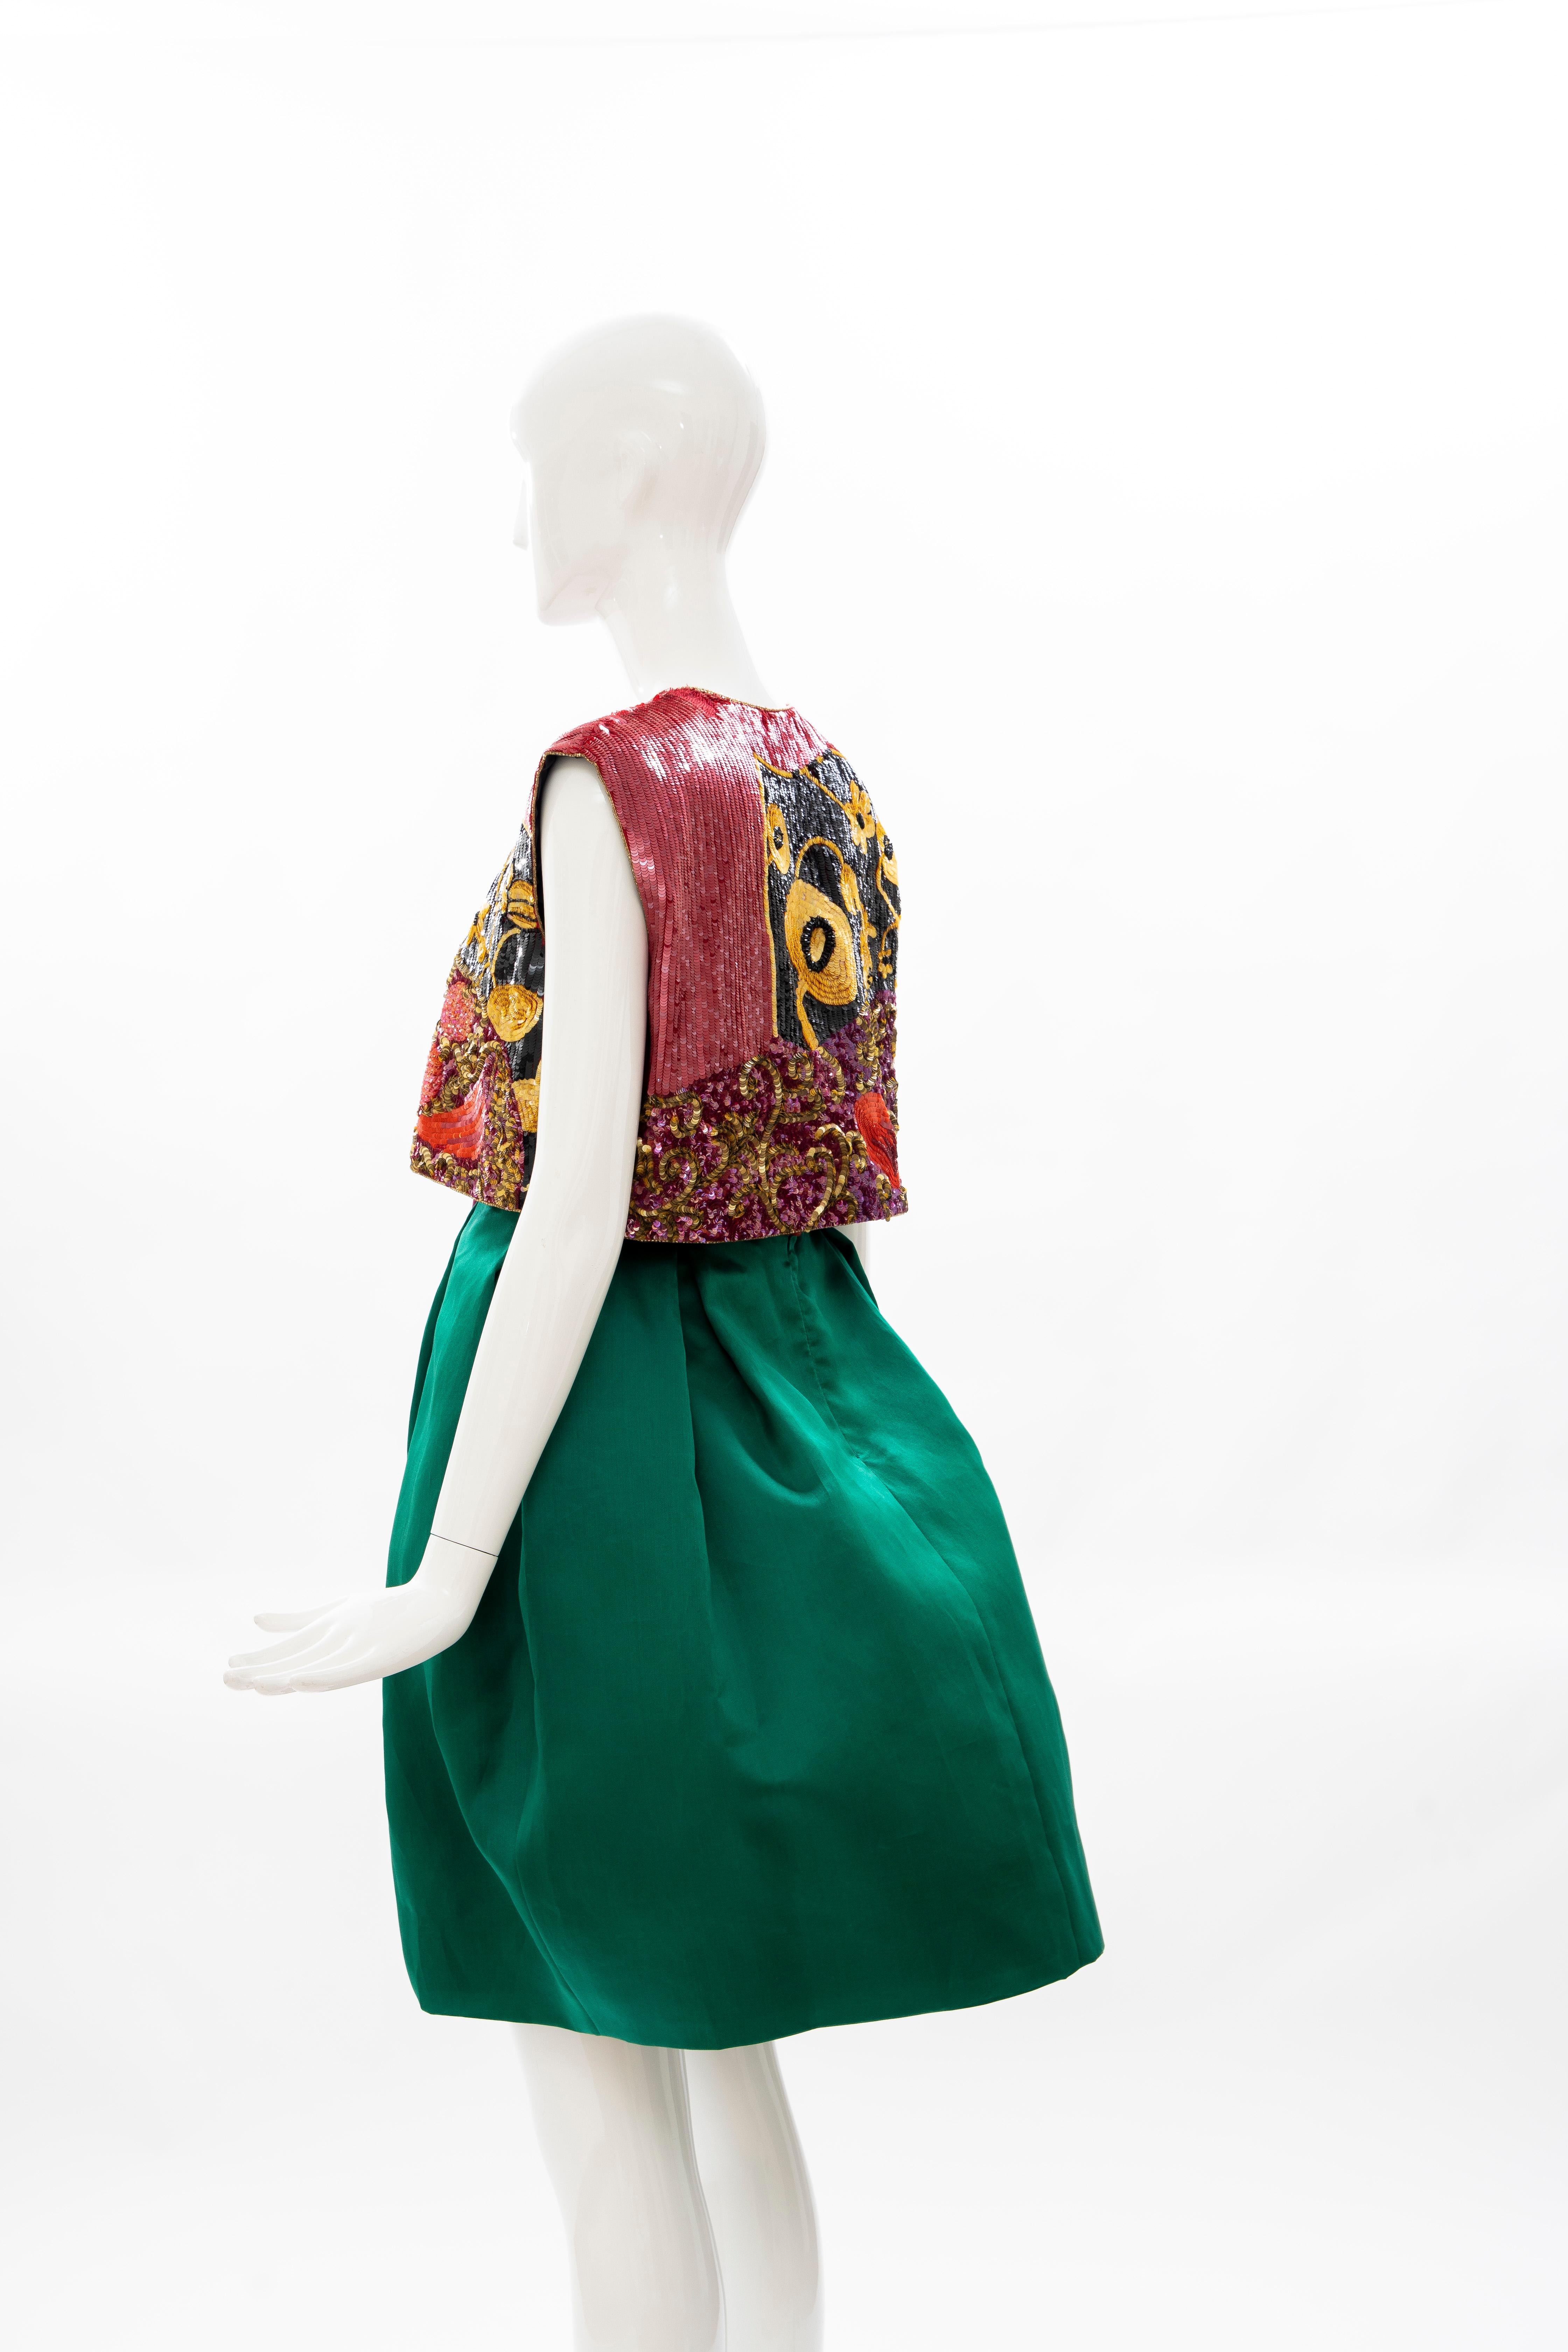 Bill Blass Matisse Inspired Embroidered Sequined Dress Ensemble, Spring 1988 For Sale 8